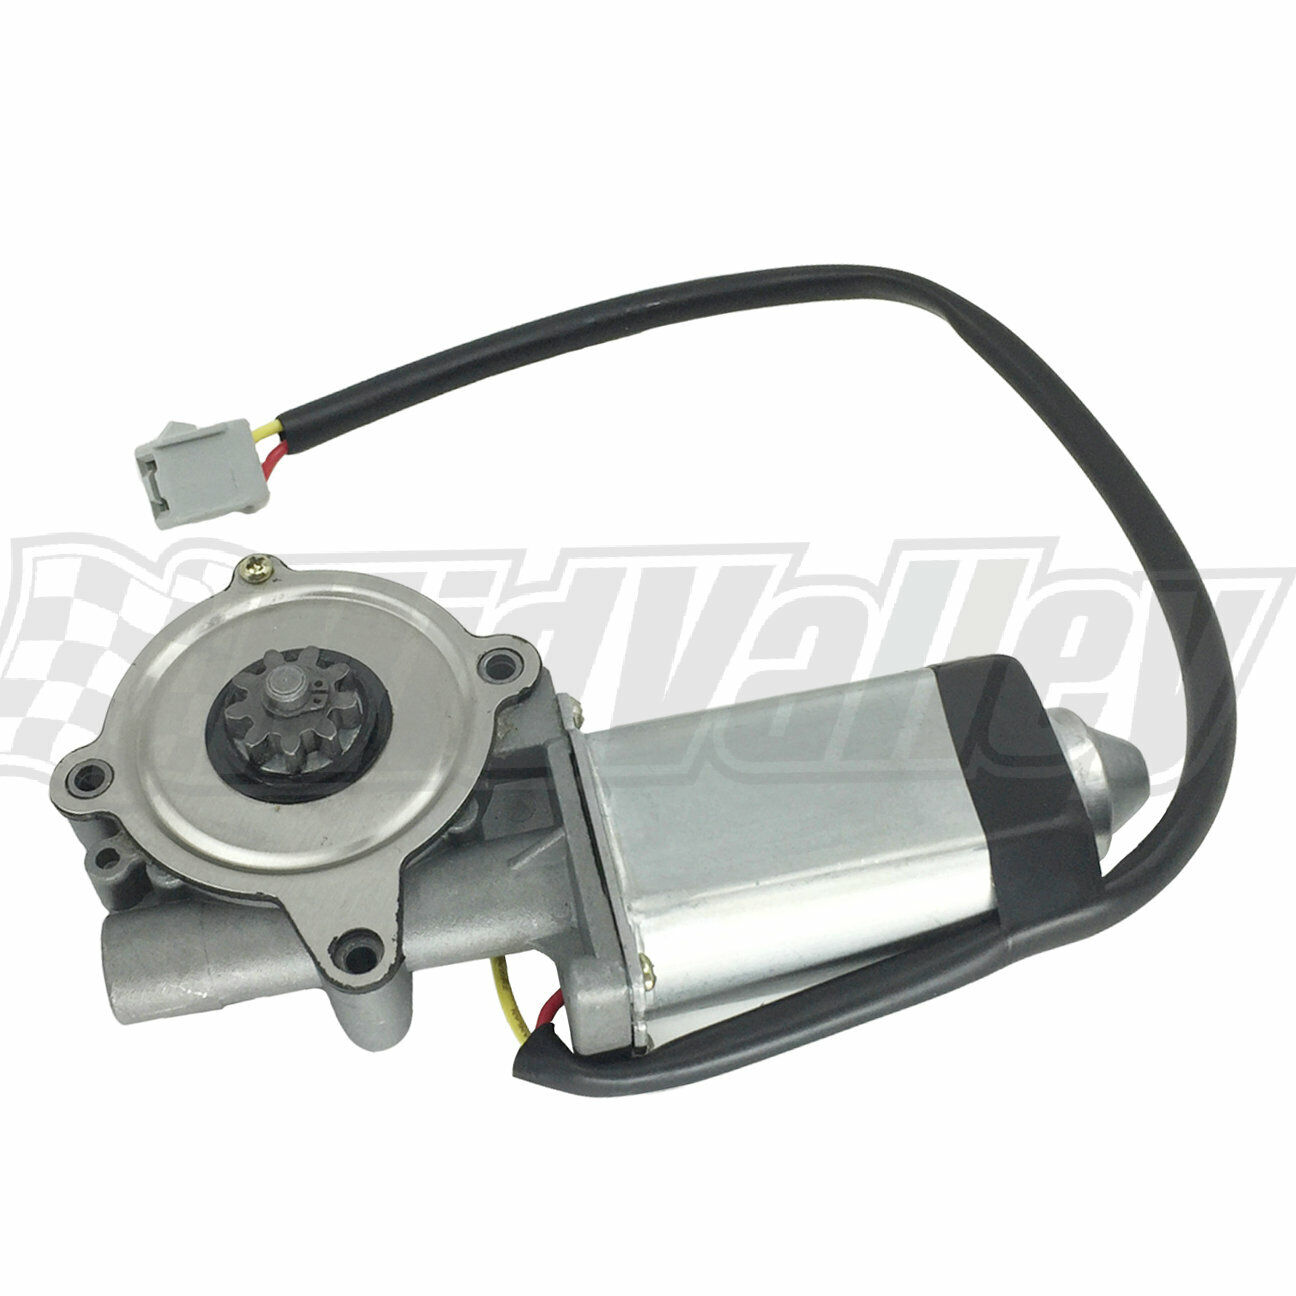 Power Window Motor Front-Left/Right For Ford Thunderbird Mercury Cougar 3.8L